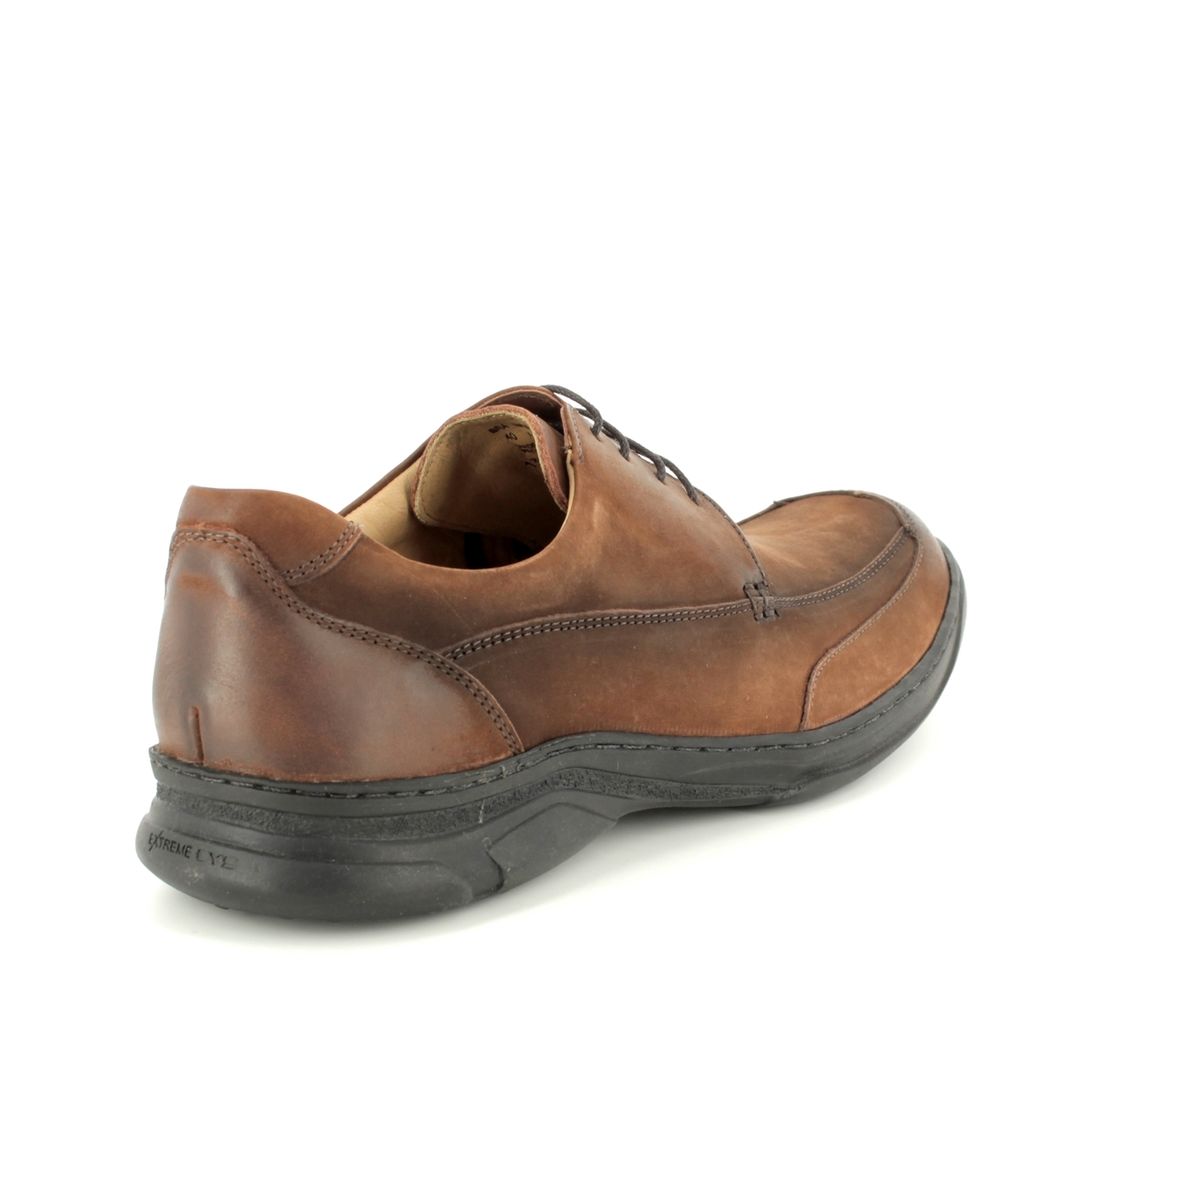 Savelli Floater Lace 04613-20 Brown nubuck casual shoes